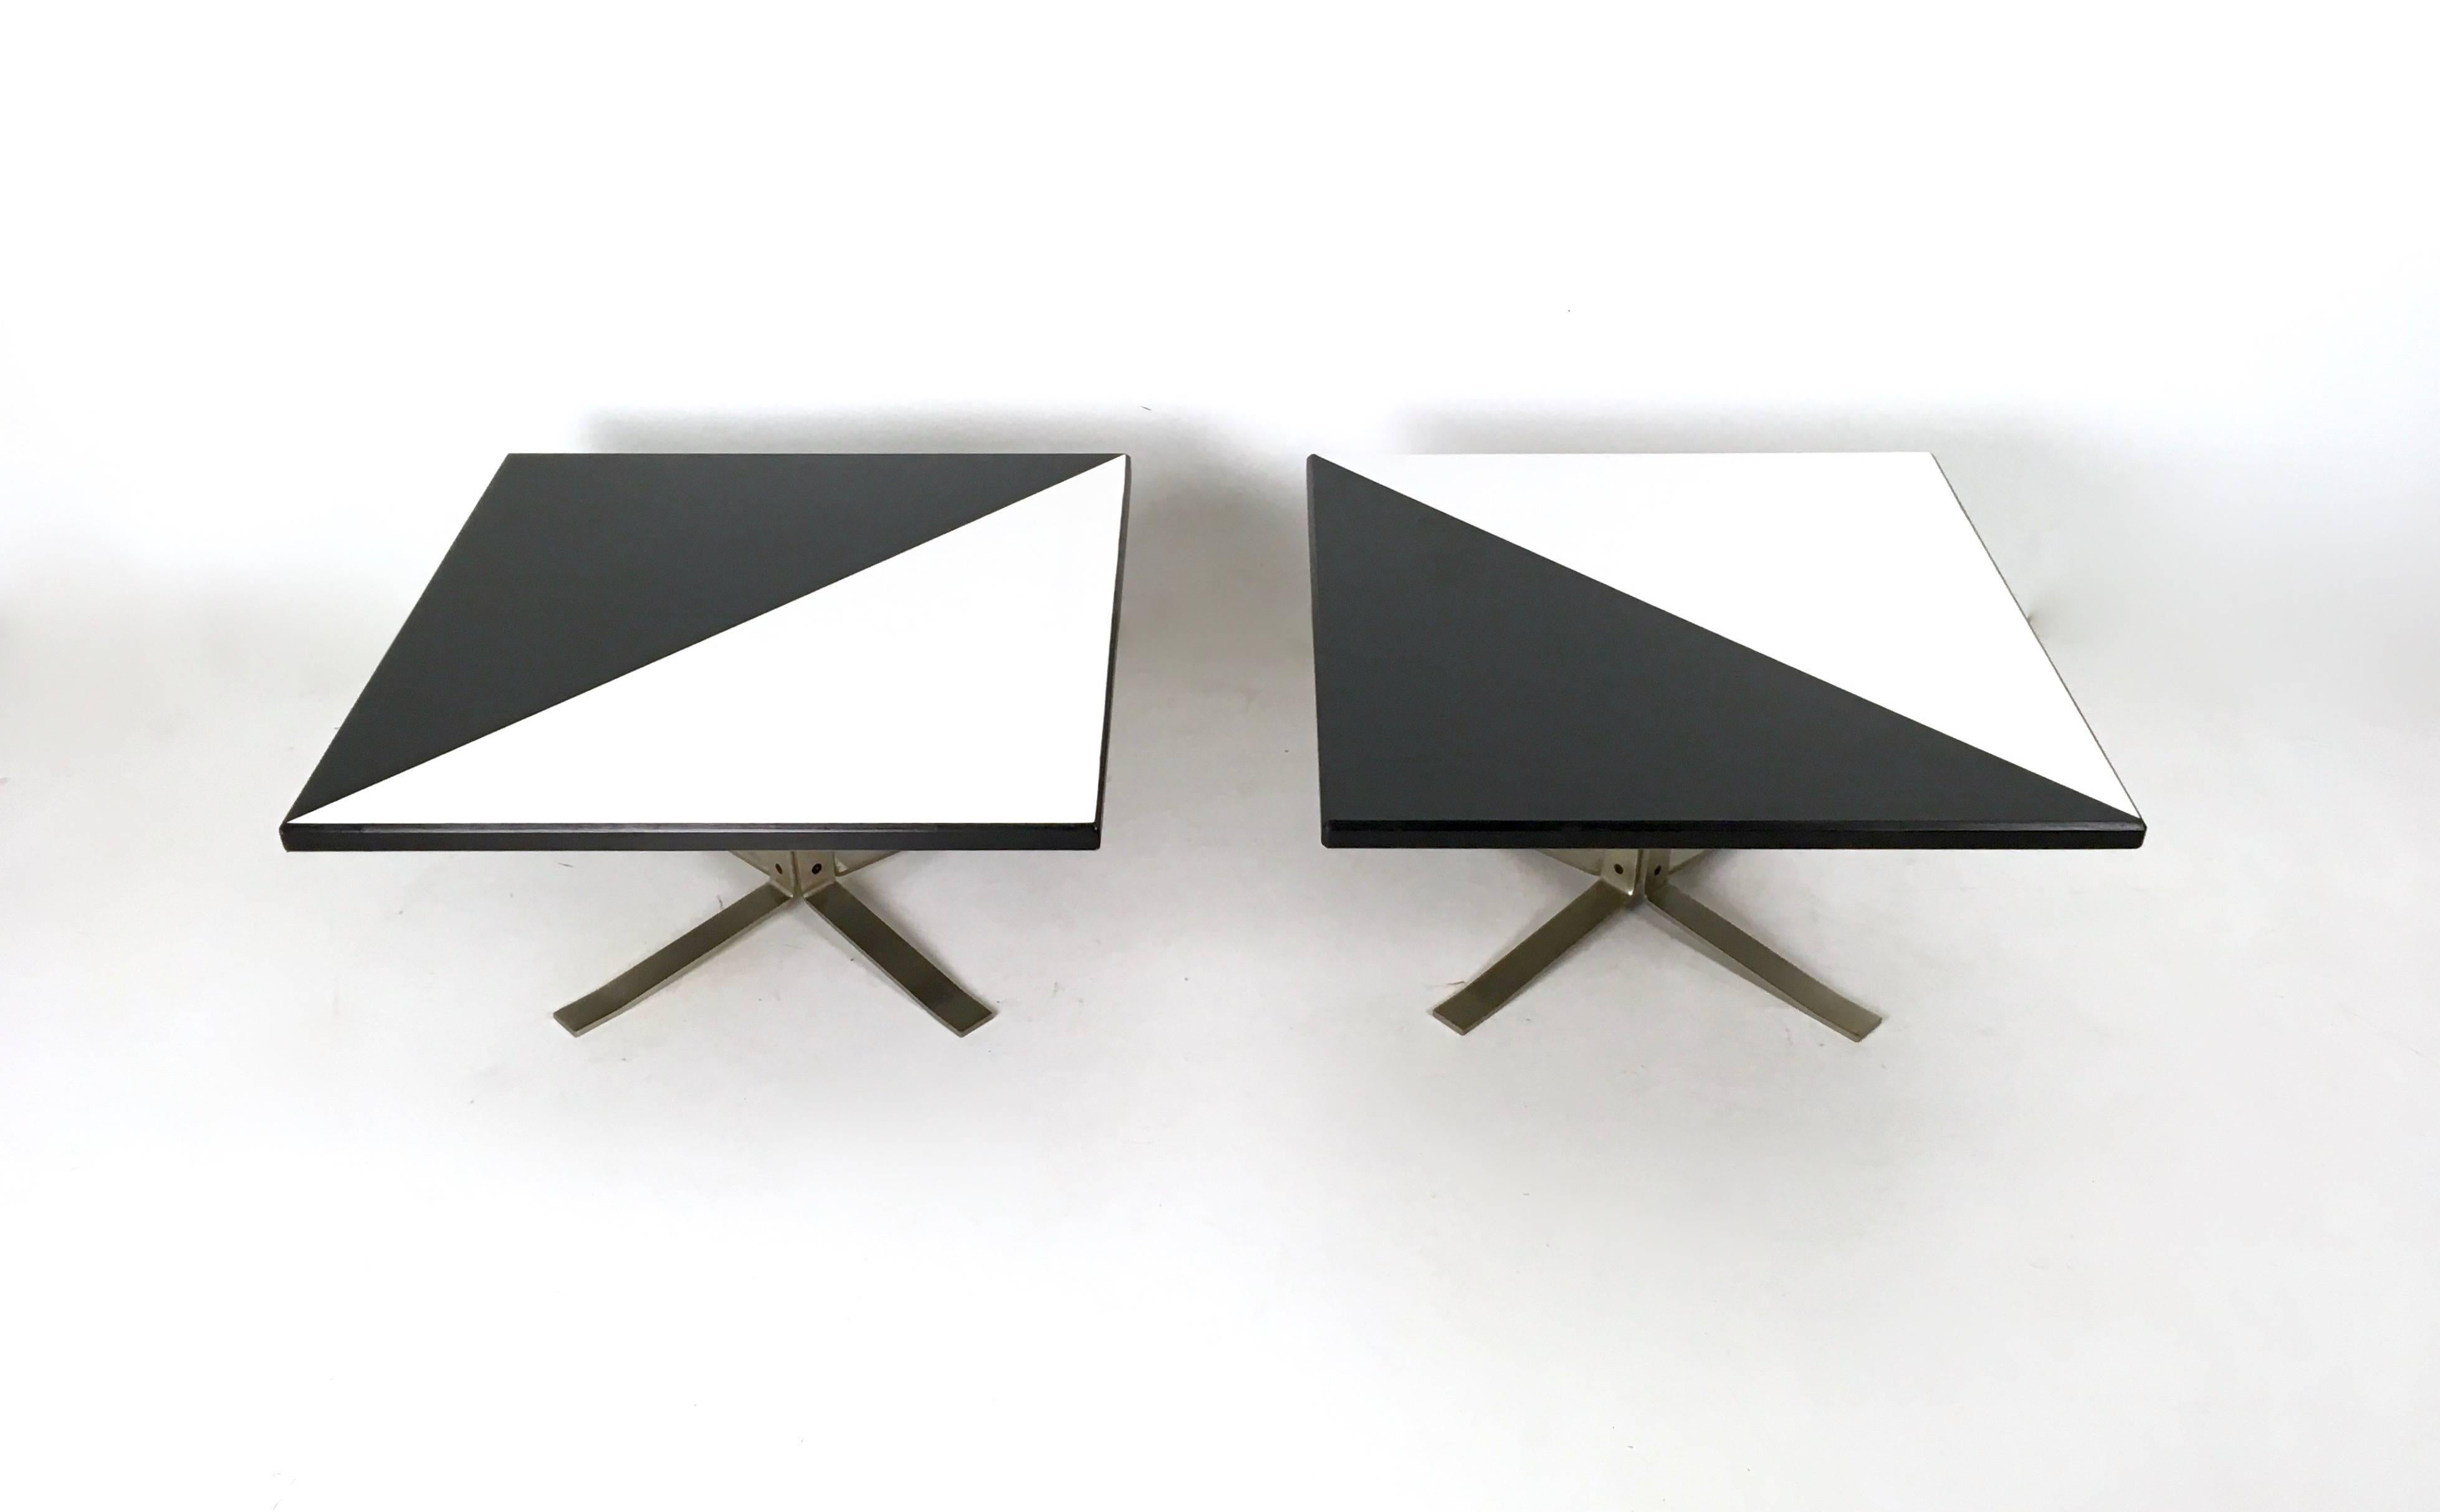 Italian Pair of Coffee Tables by Gianni Moscatelli prod. by Formanova, 1960s